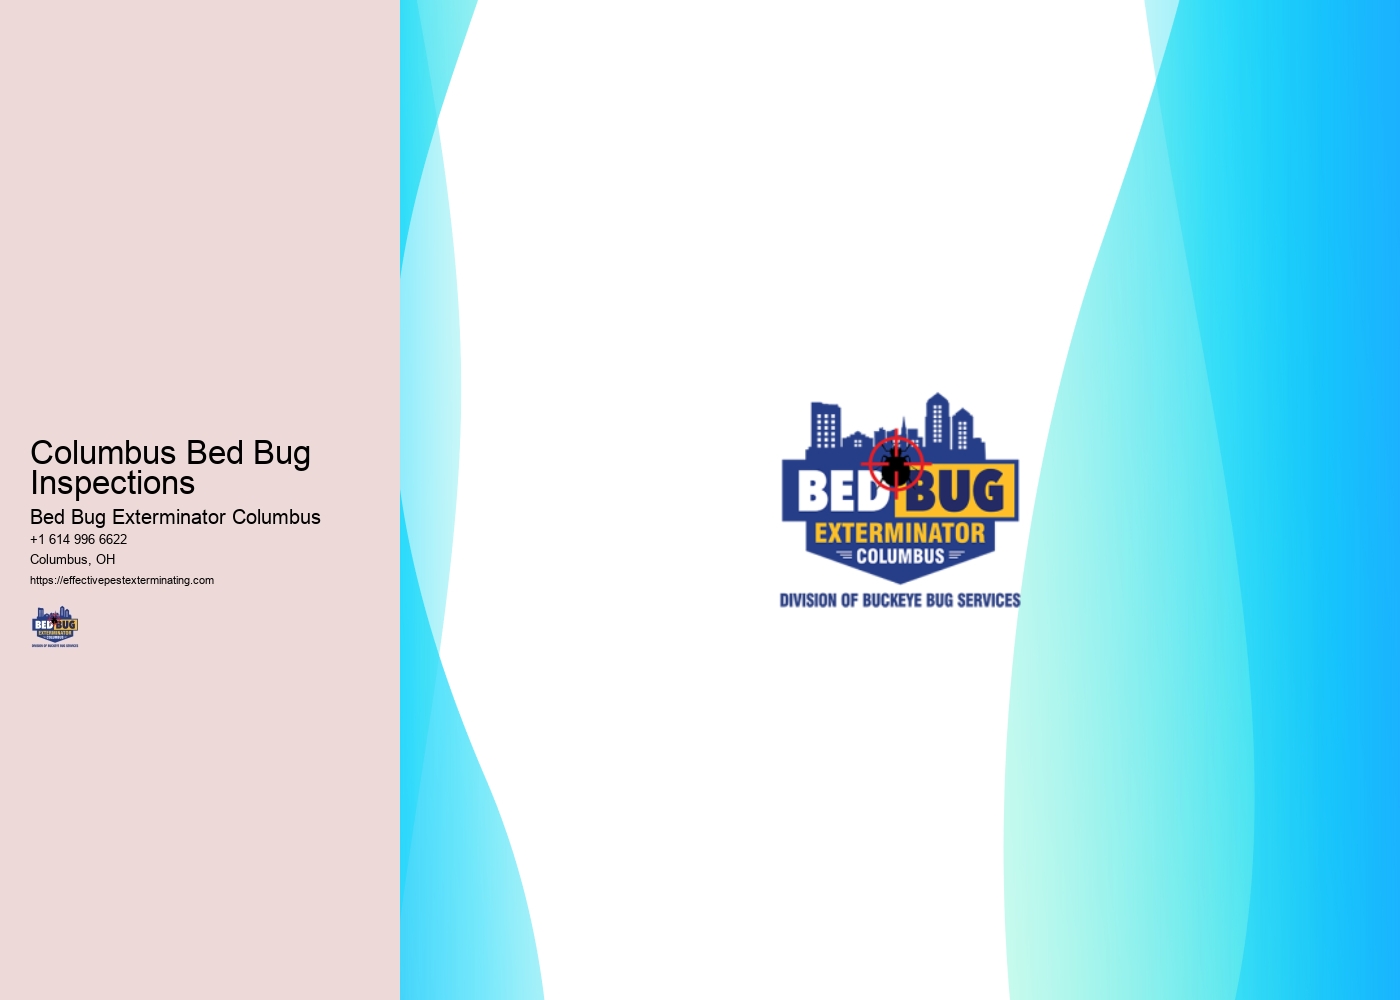 Columbus Bed Bug Inspections